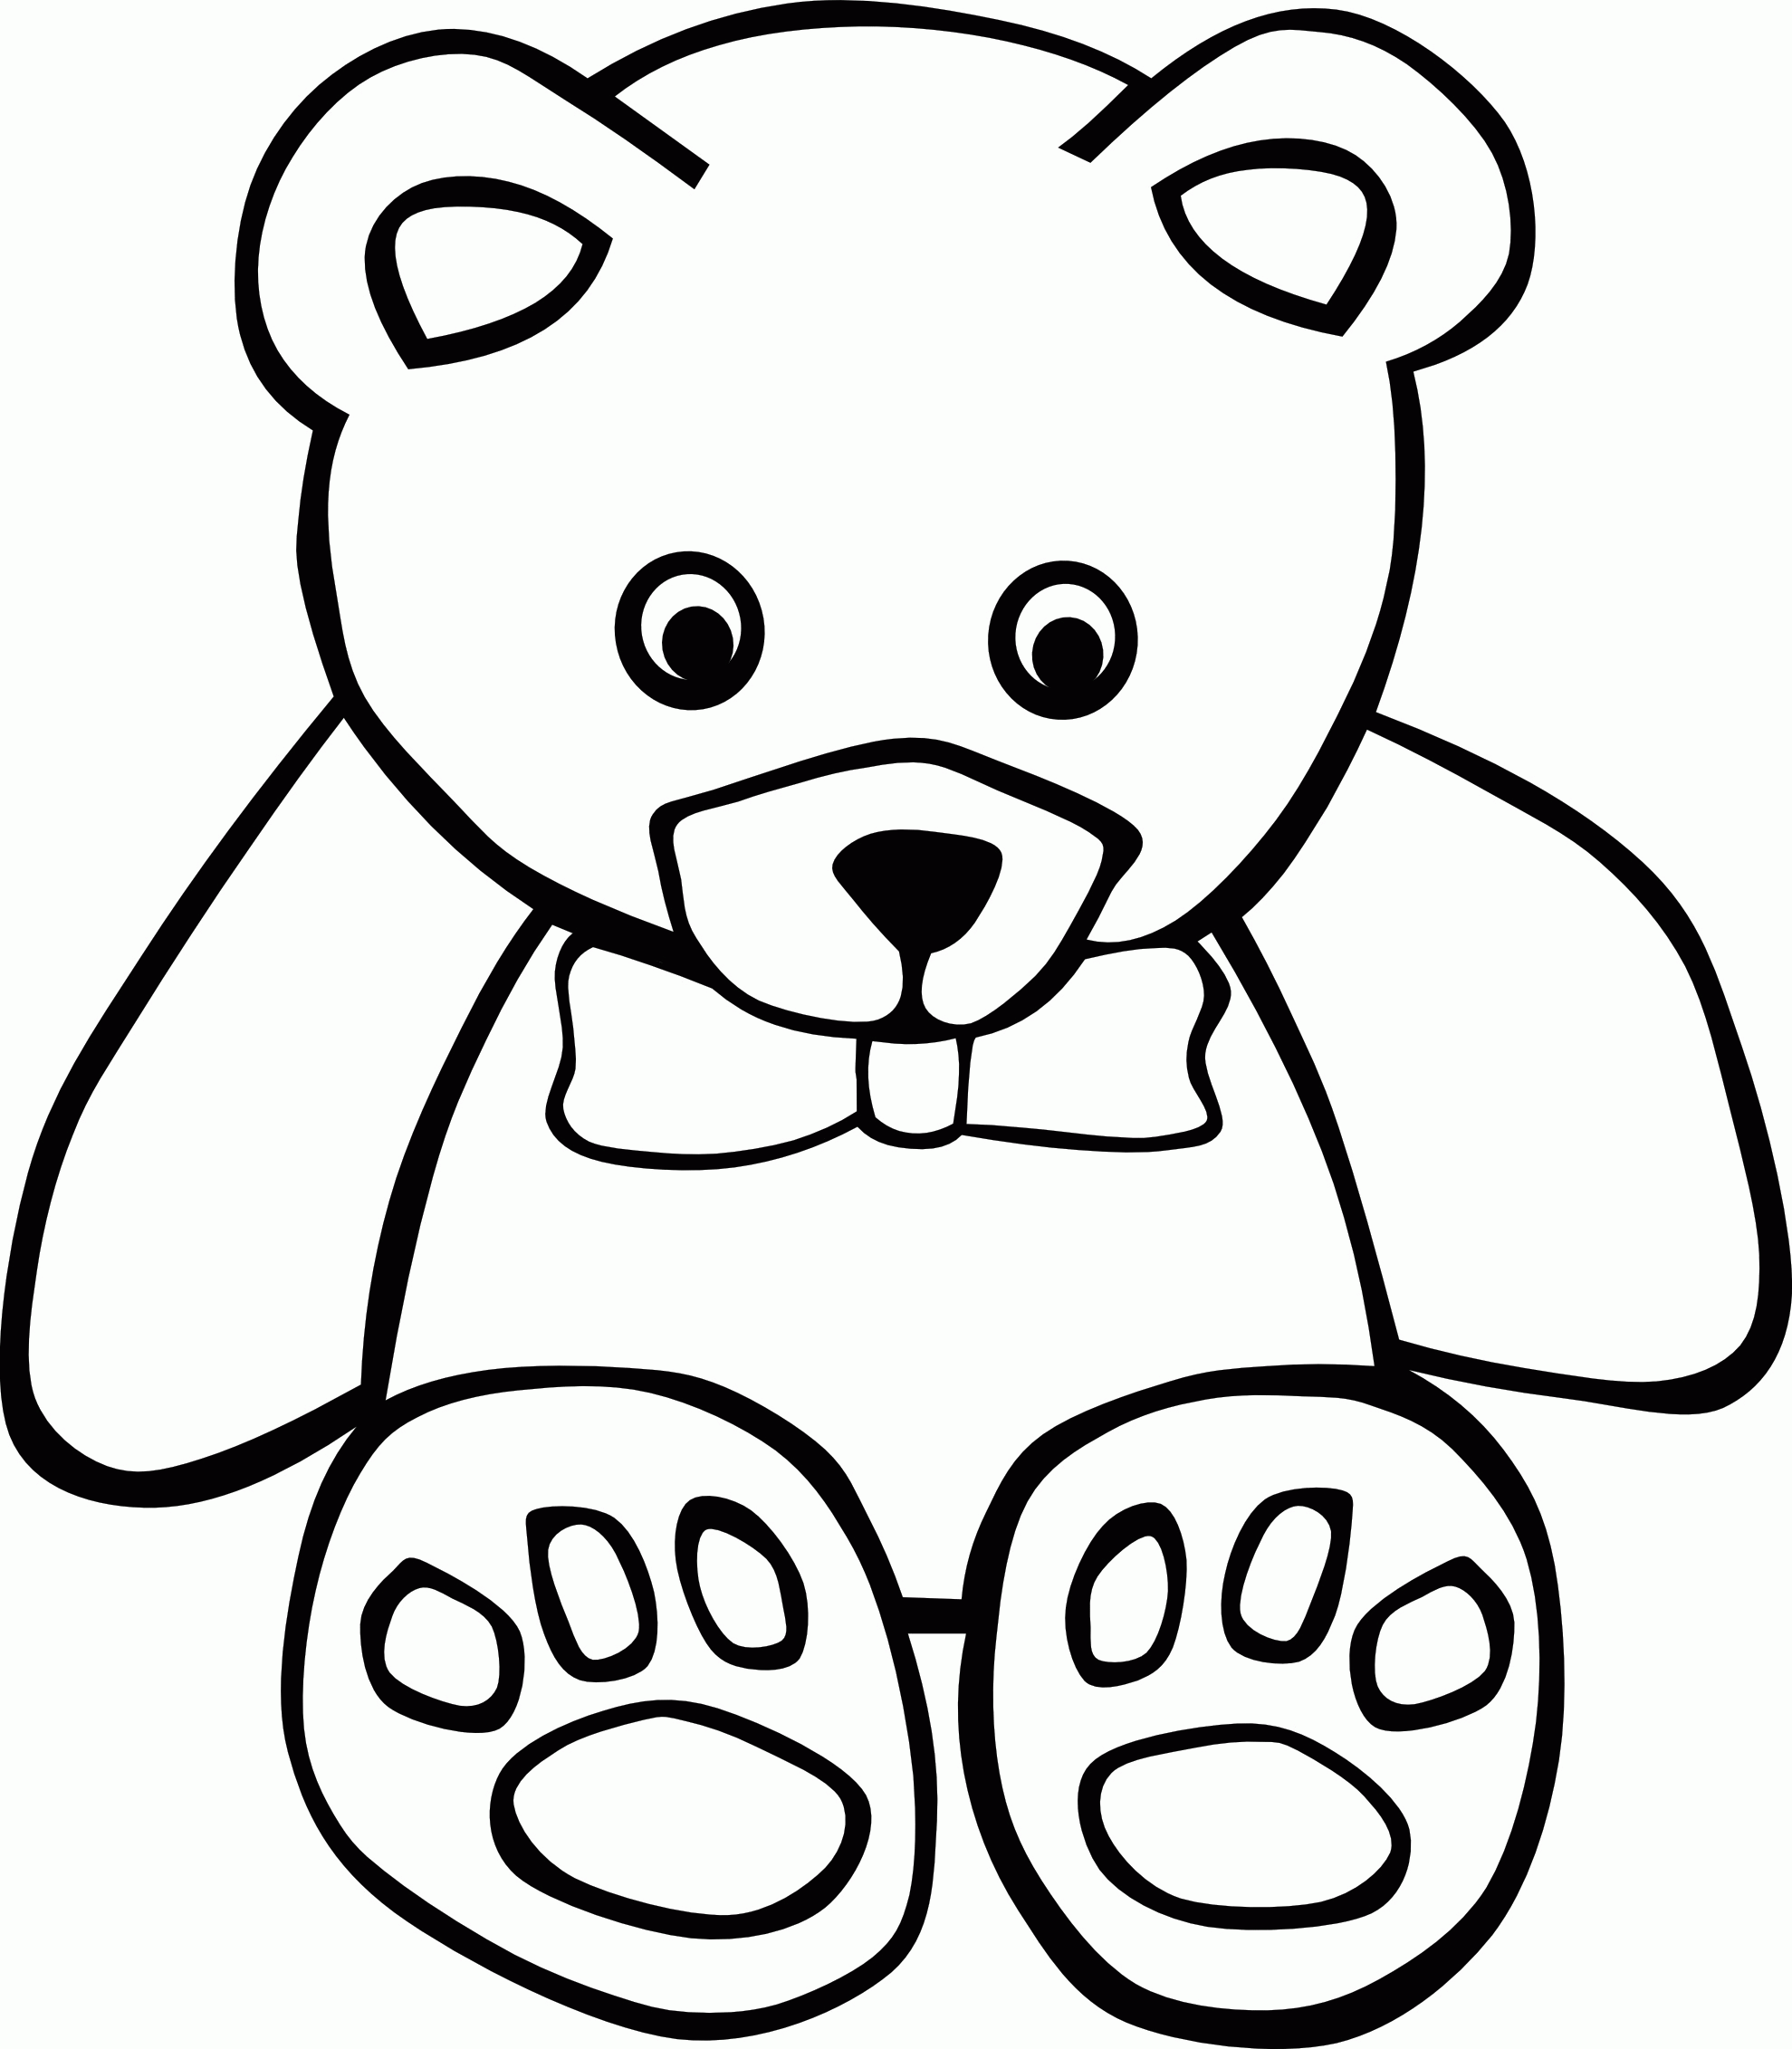 Teddy Bear Coloring Pages Templates   Coloring Home